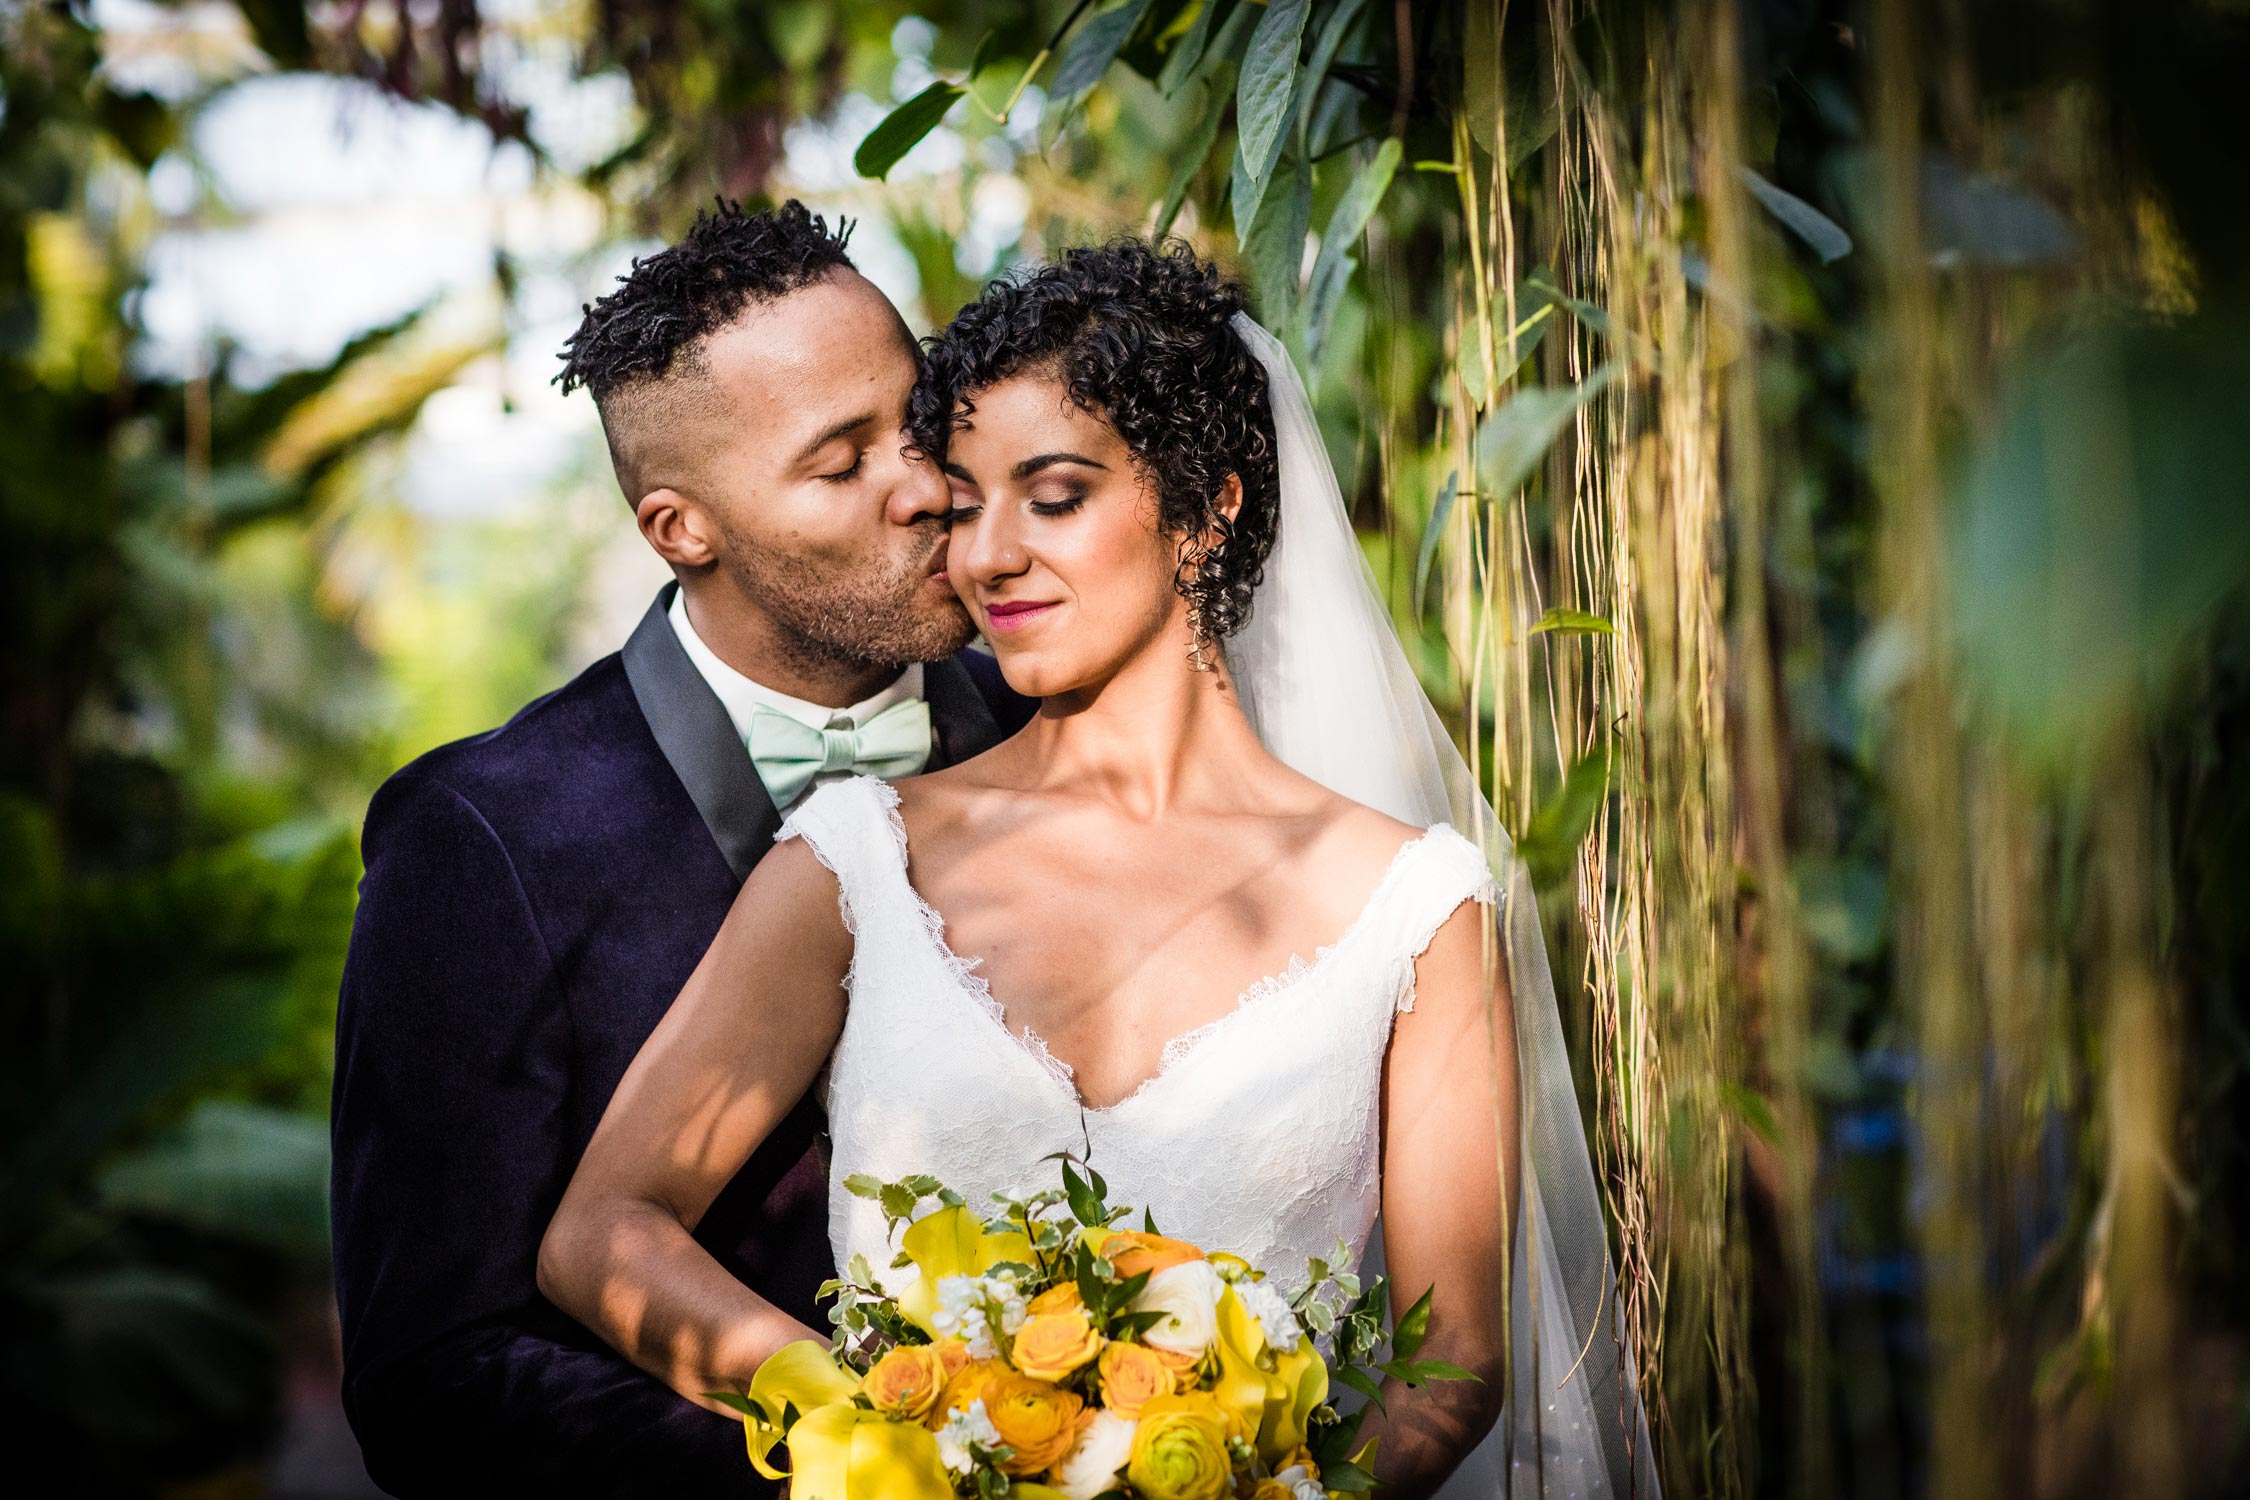 A couple kisses during a Garfield Park Conservatory wedding.